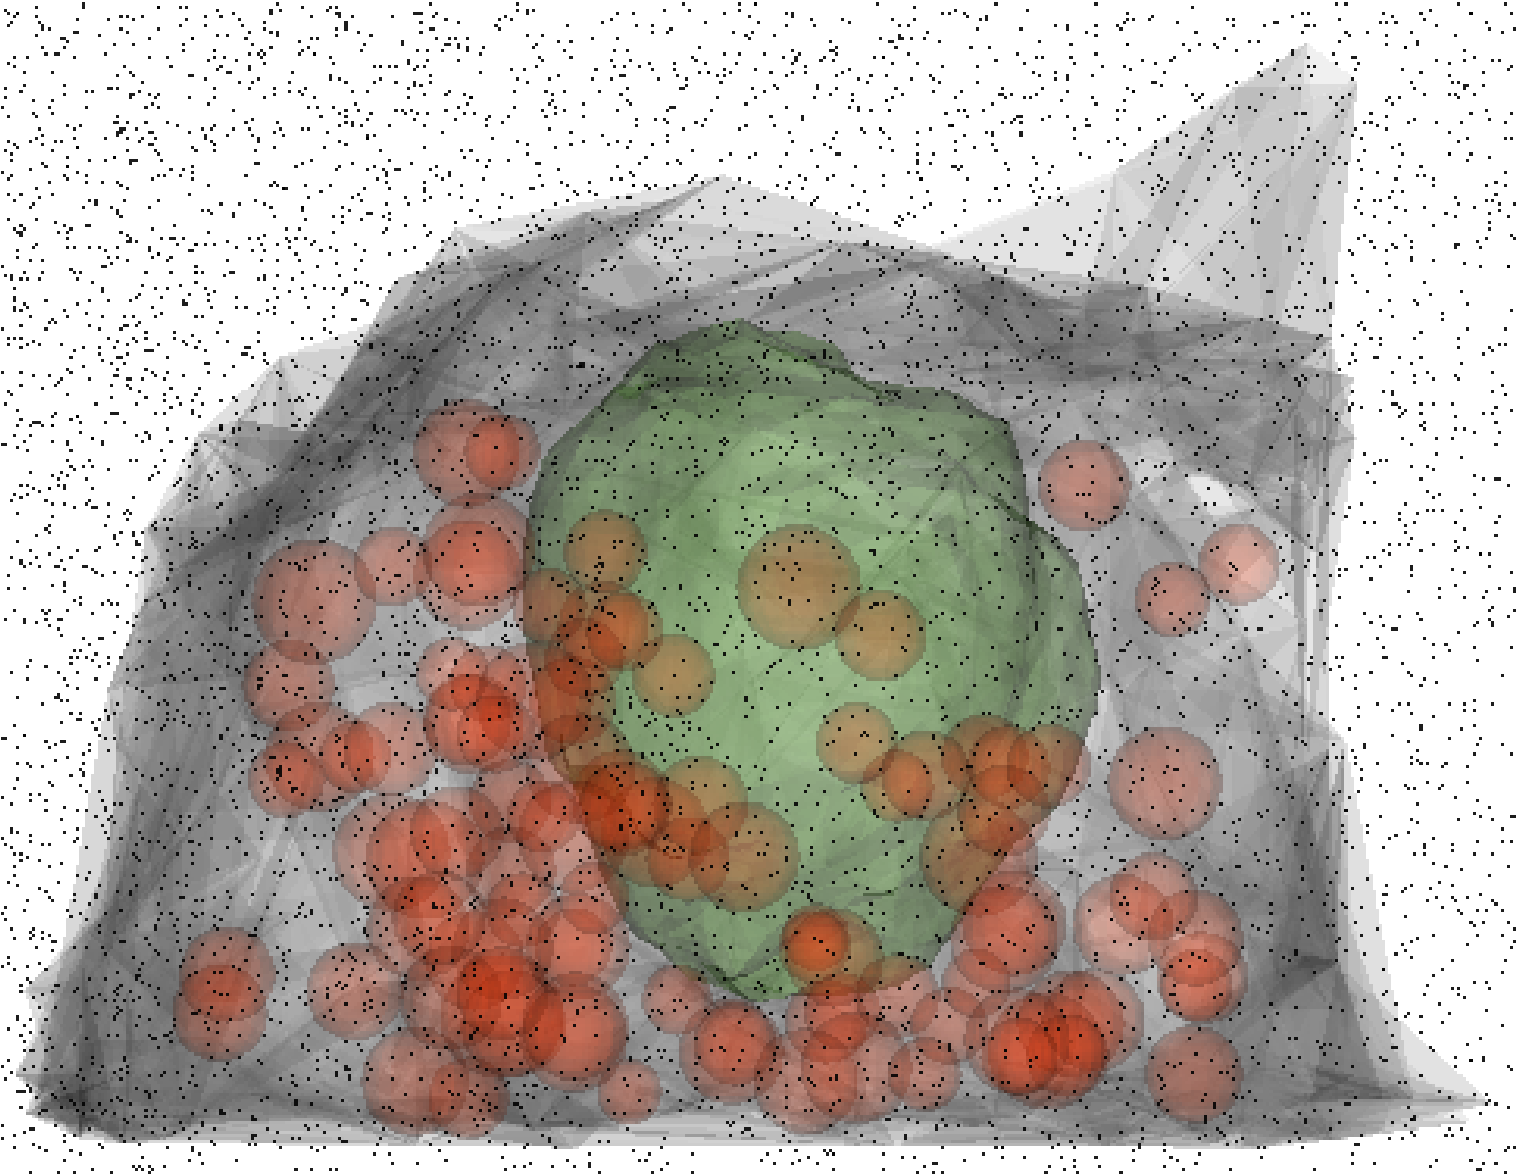 Simulation of contaminant distribution (black) within the nucleus (green) and lysosomes (red) of a Hepa cell (gray).